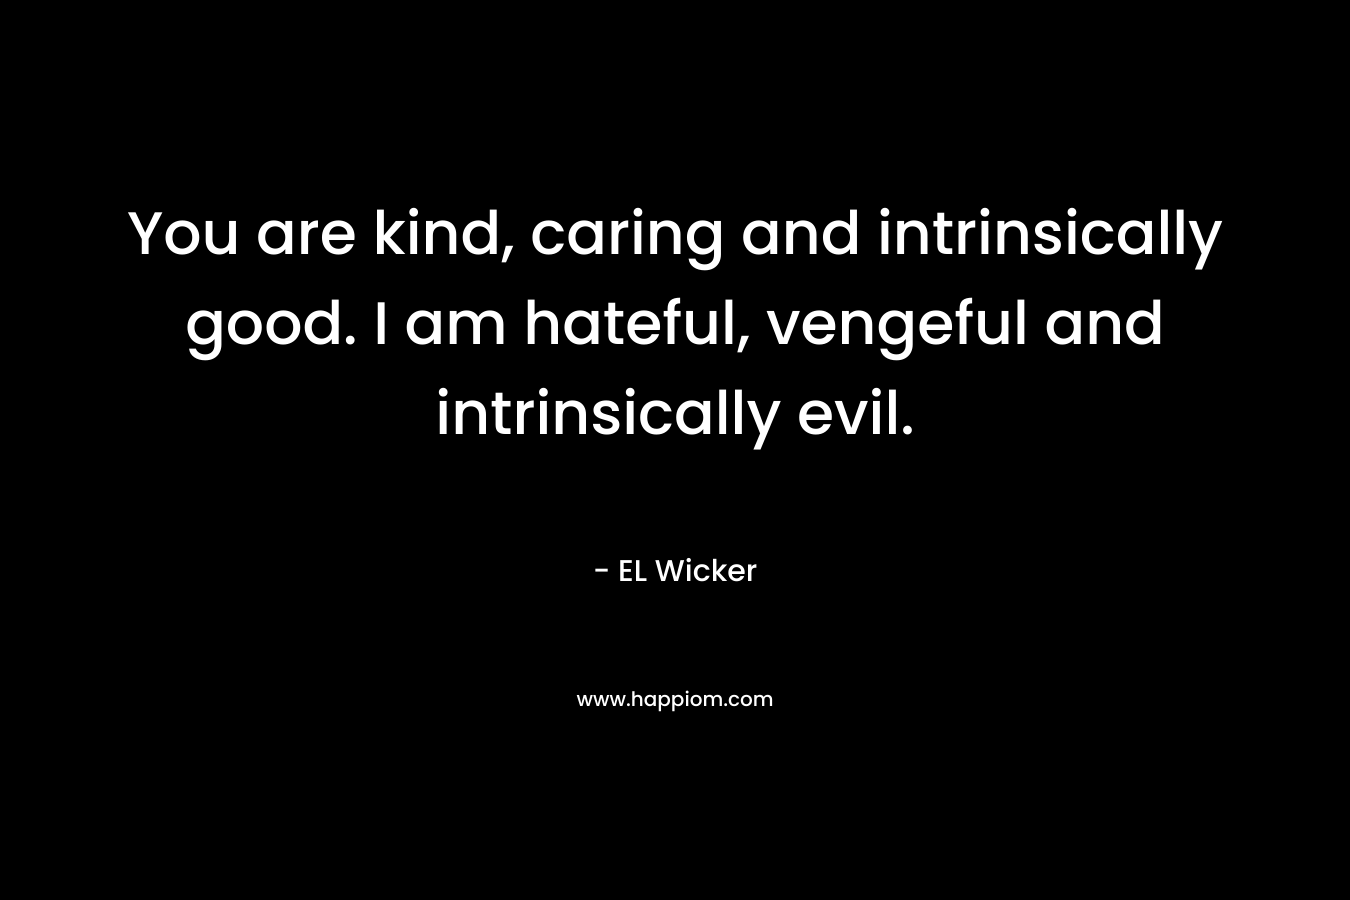 You are kind, caring and intrinsically good. I am hateful, vengeful and intrinsically evil.